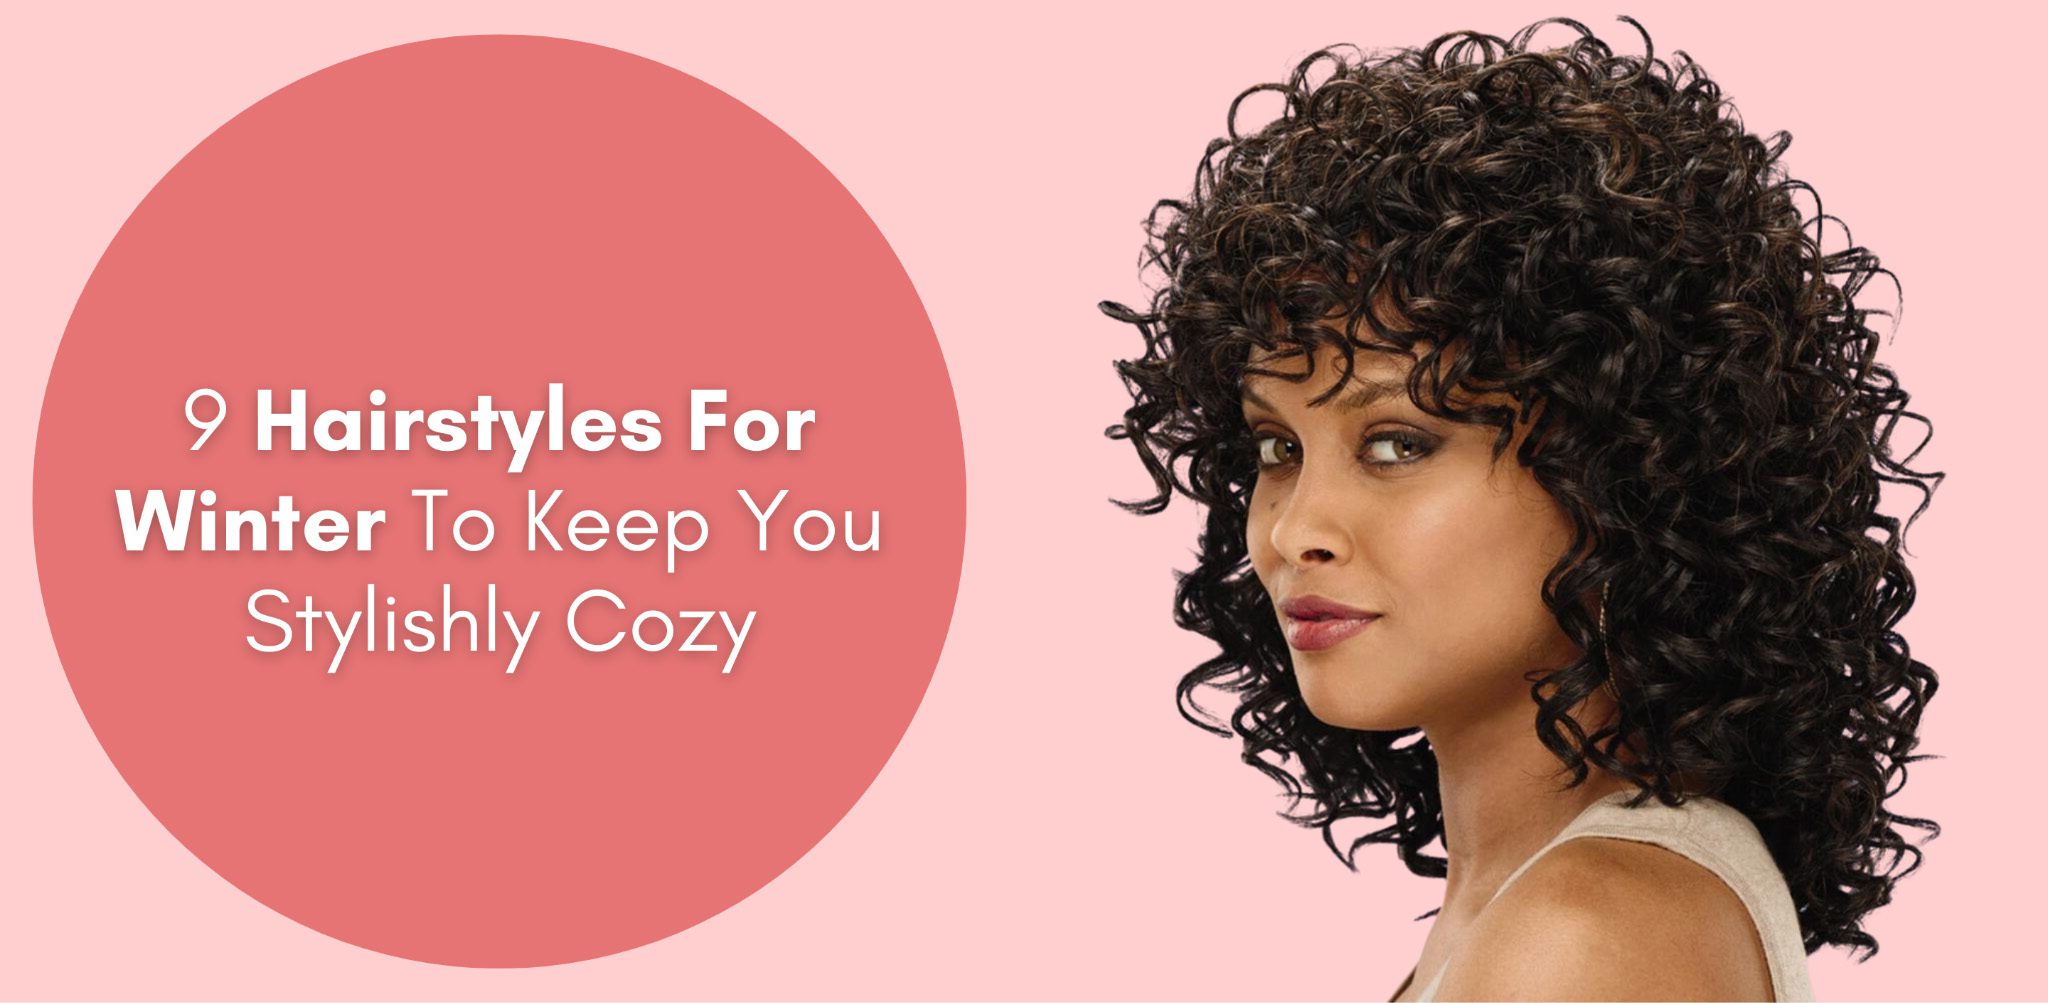 9 hairstyles for winter to keep you stylishly cozy